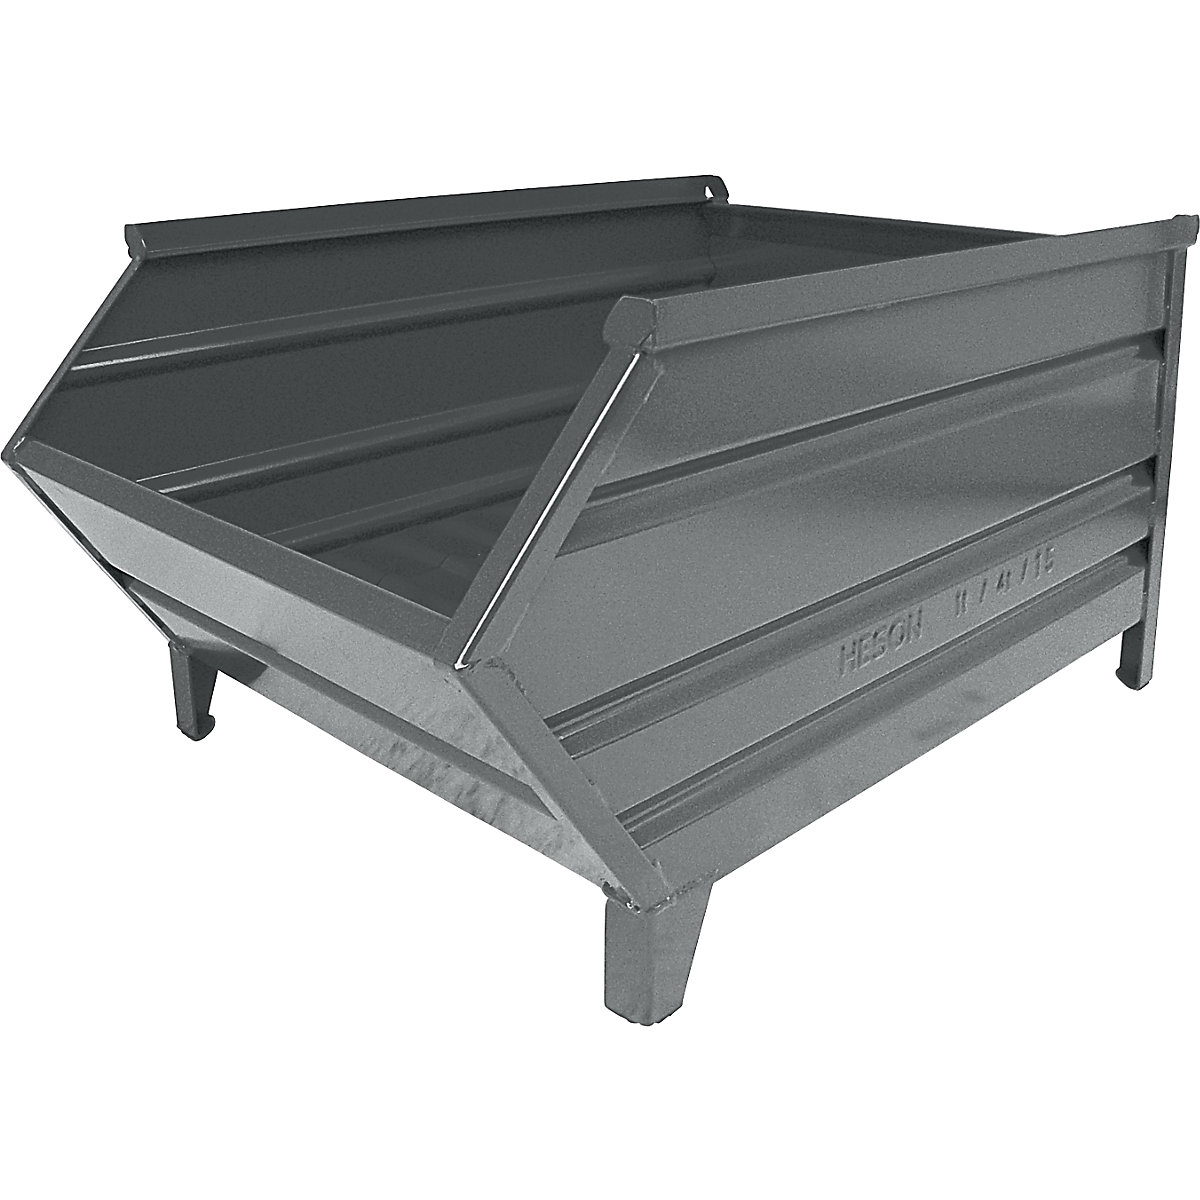 Box pallet made of sheet steel, with access opening – Heson